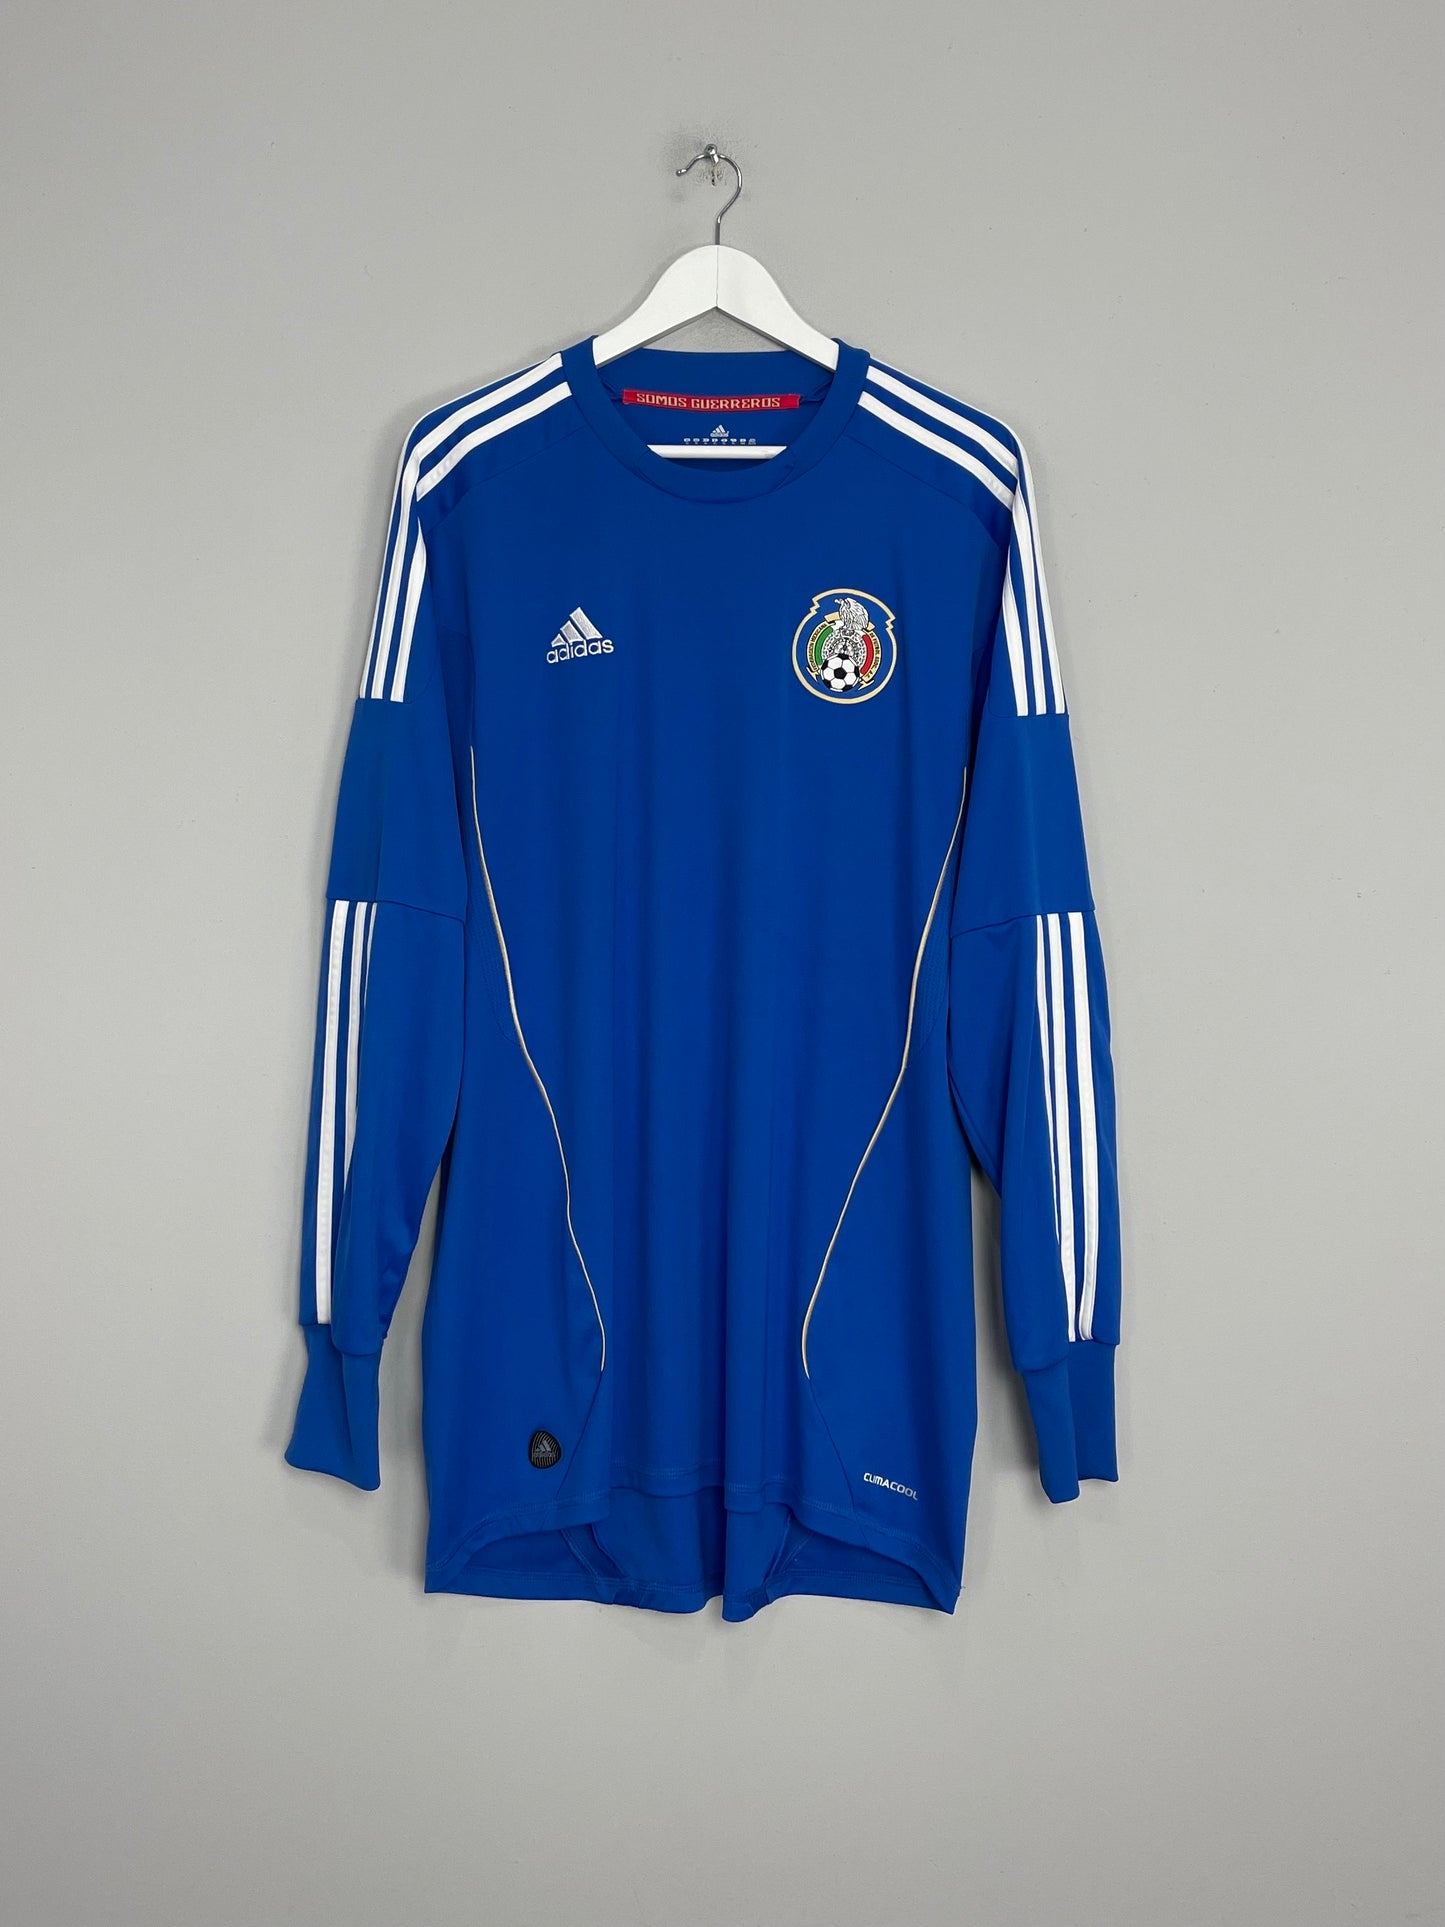 Image of the Mexico shirt from the 2011/12 season